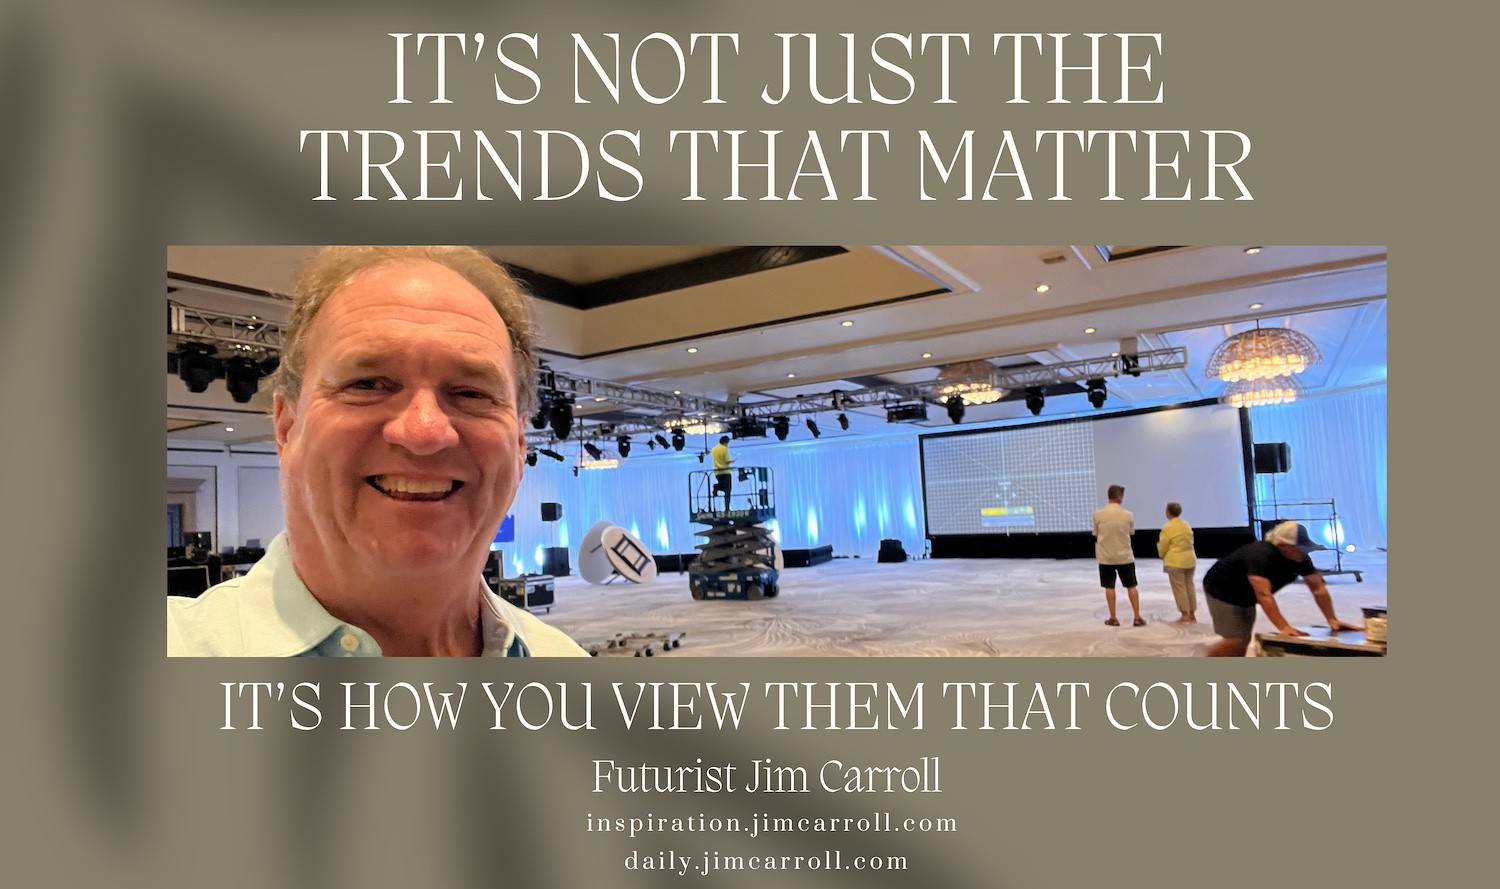 "It's not just the trends that matter. It's how you view them that counts!" - Futurist Jim Carroll